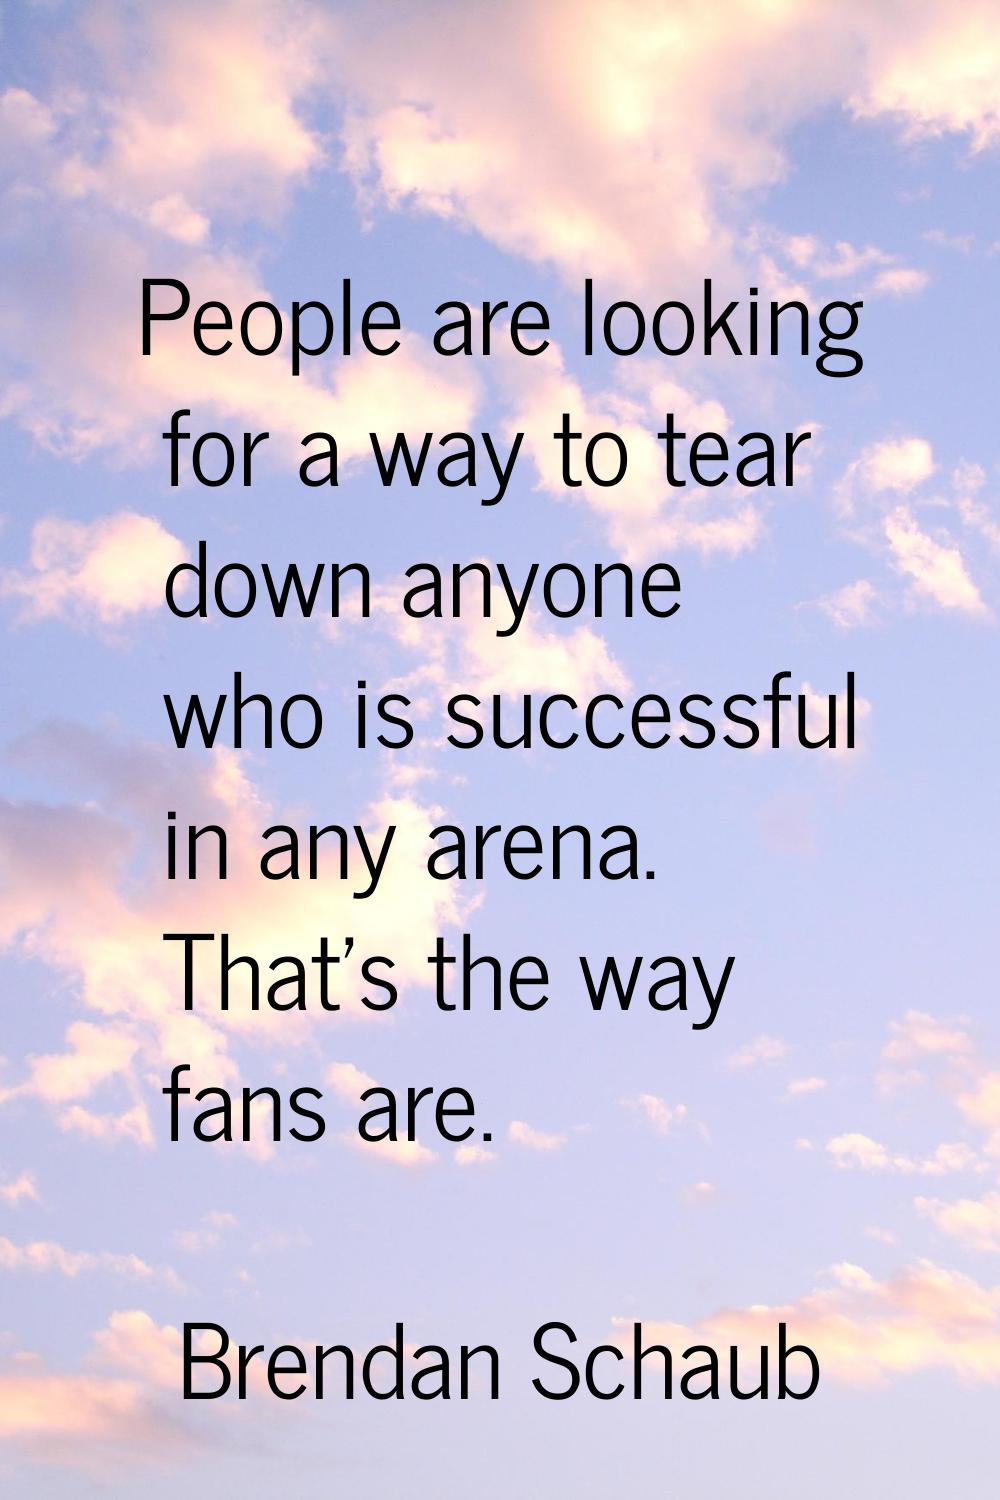 People are looking for a way to tear down anyone who is successful in any arena. That's the way fan